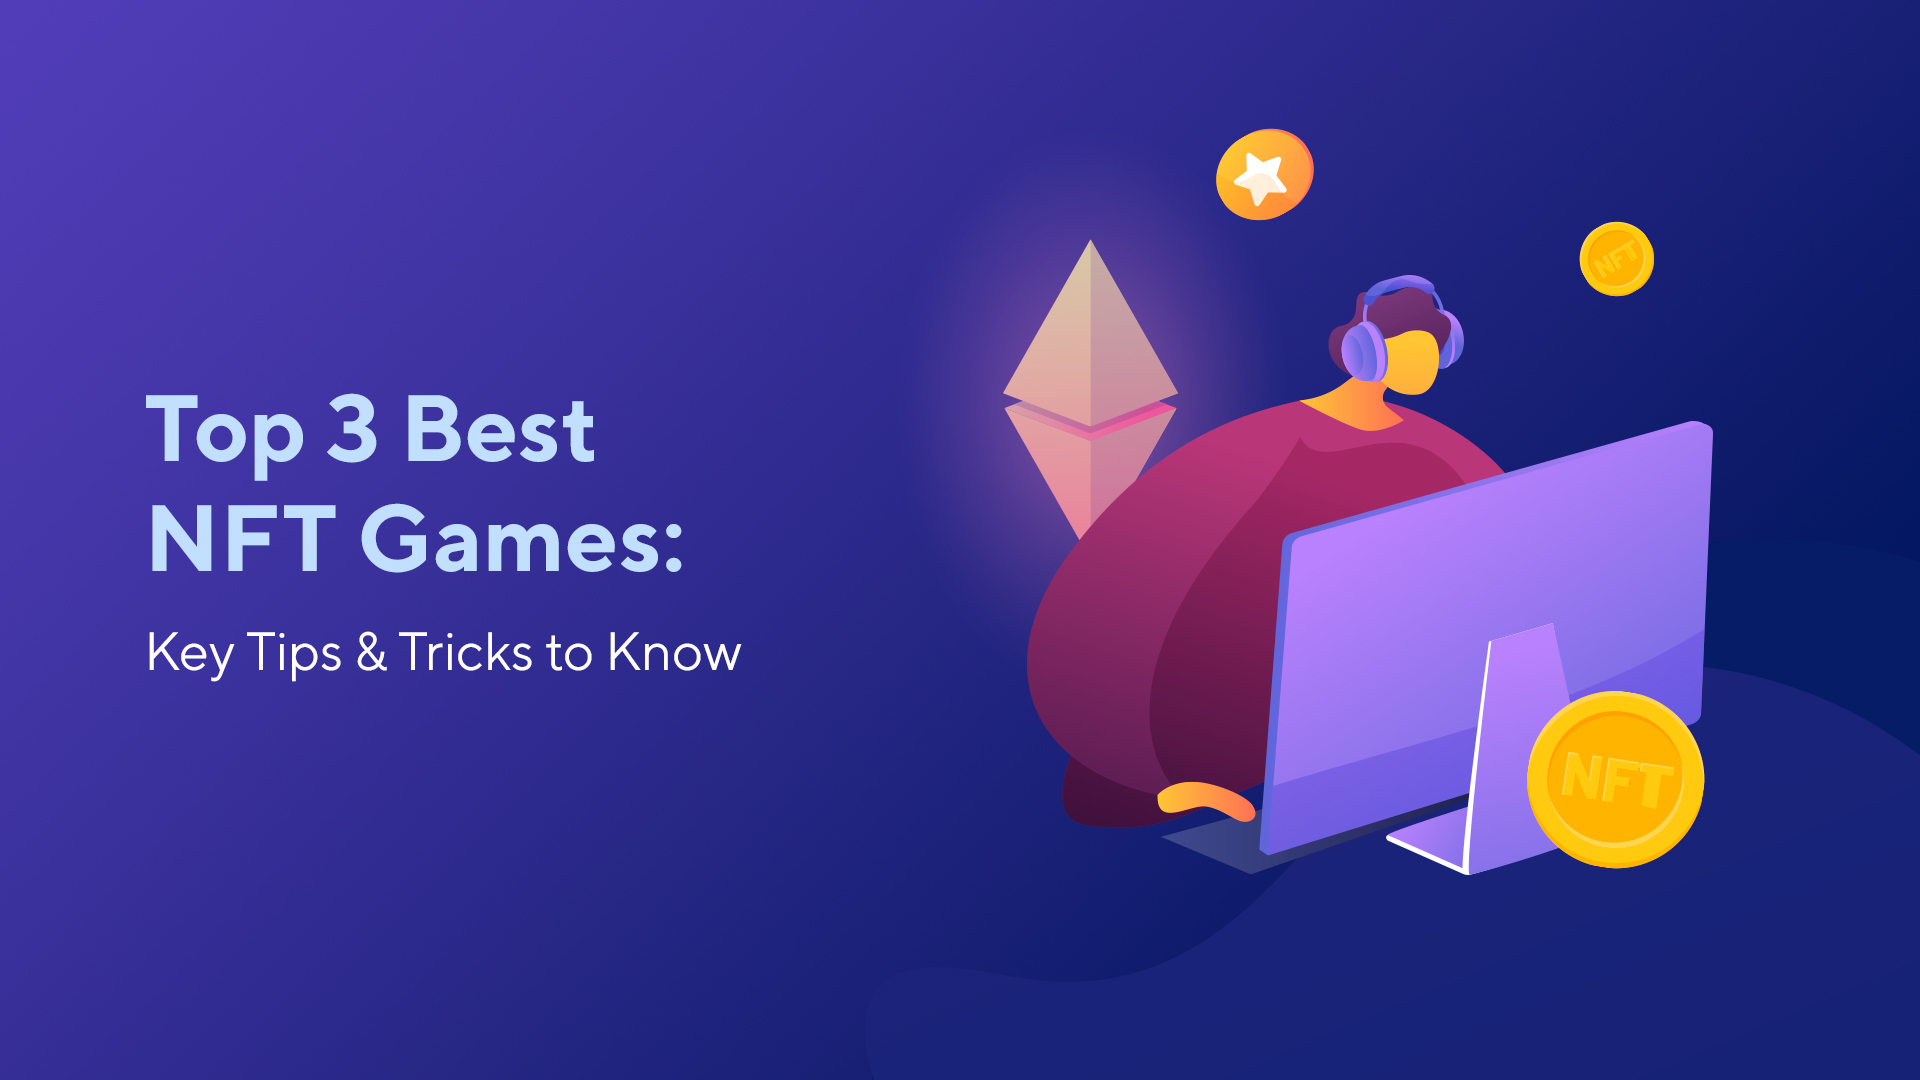 Top 3 Best NFT Games: Key Tips & Tricks to Know